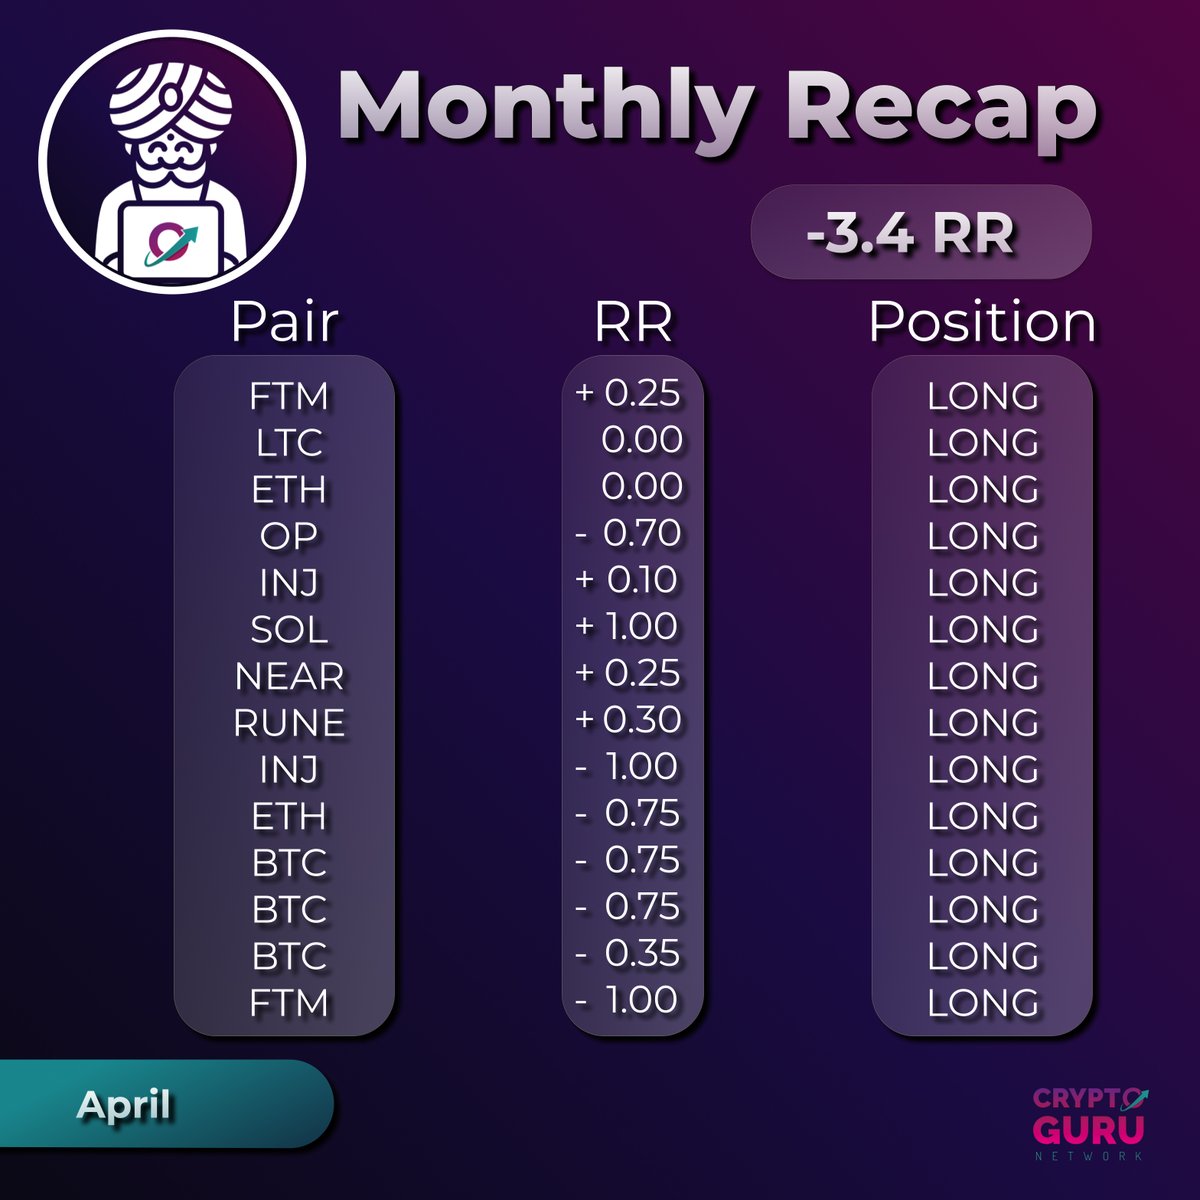 April Trading Results: -3.4R❌ Bad performance, sucks after the results I had prior. It's part of the game and as you know, I share everything, both my wins and losses. I hope this inspires some of the other traders on Twitter to share both their wins and losses as well.